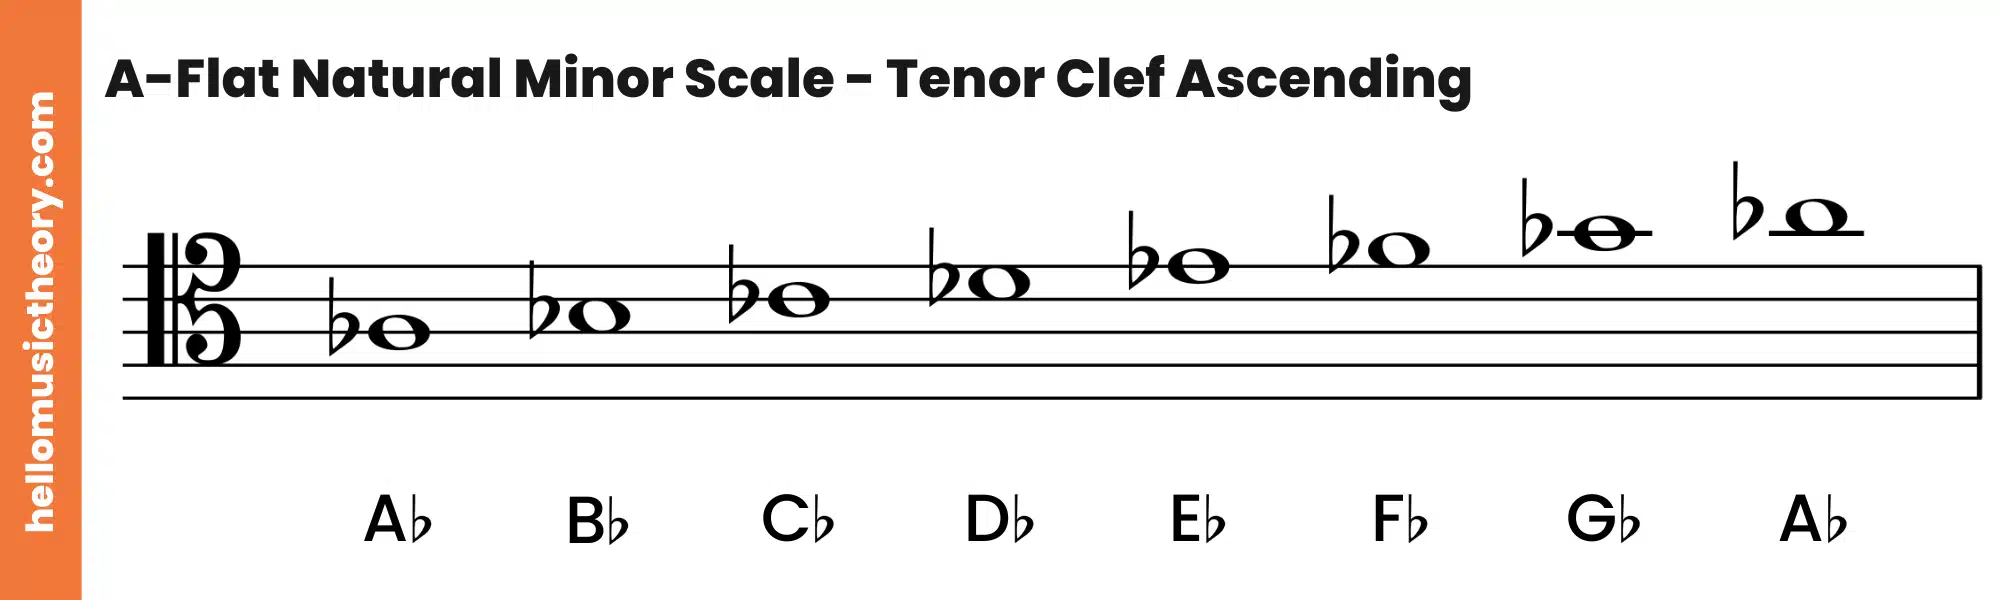 A-Flat Natural Minor Scale Tenor Clef Ascending